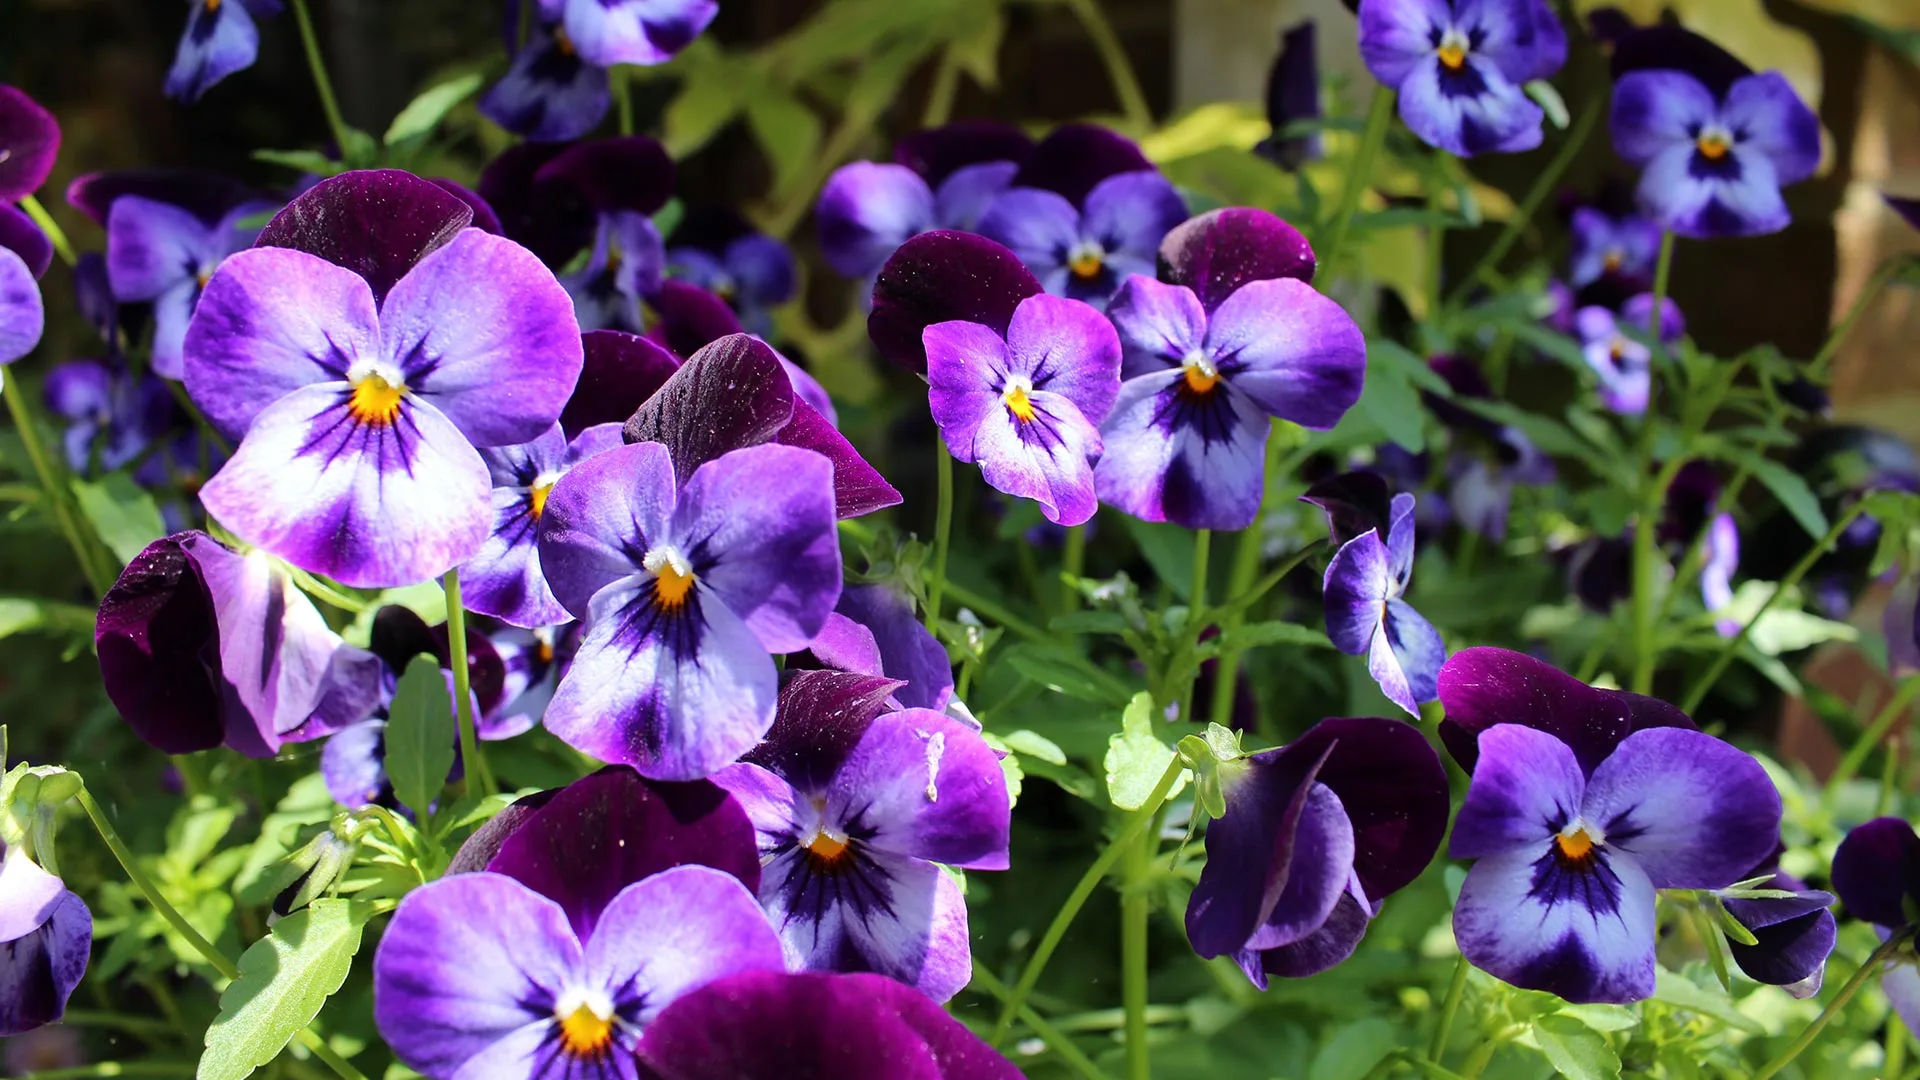 4 Eye-Catching Flowers That Can Add Beauty to Your Landscape Beds This Fall